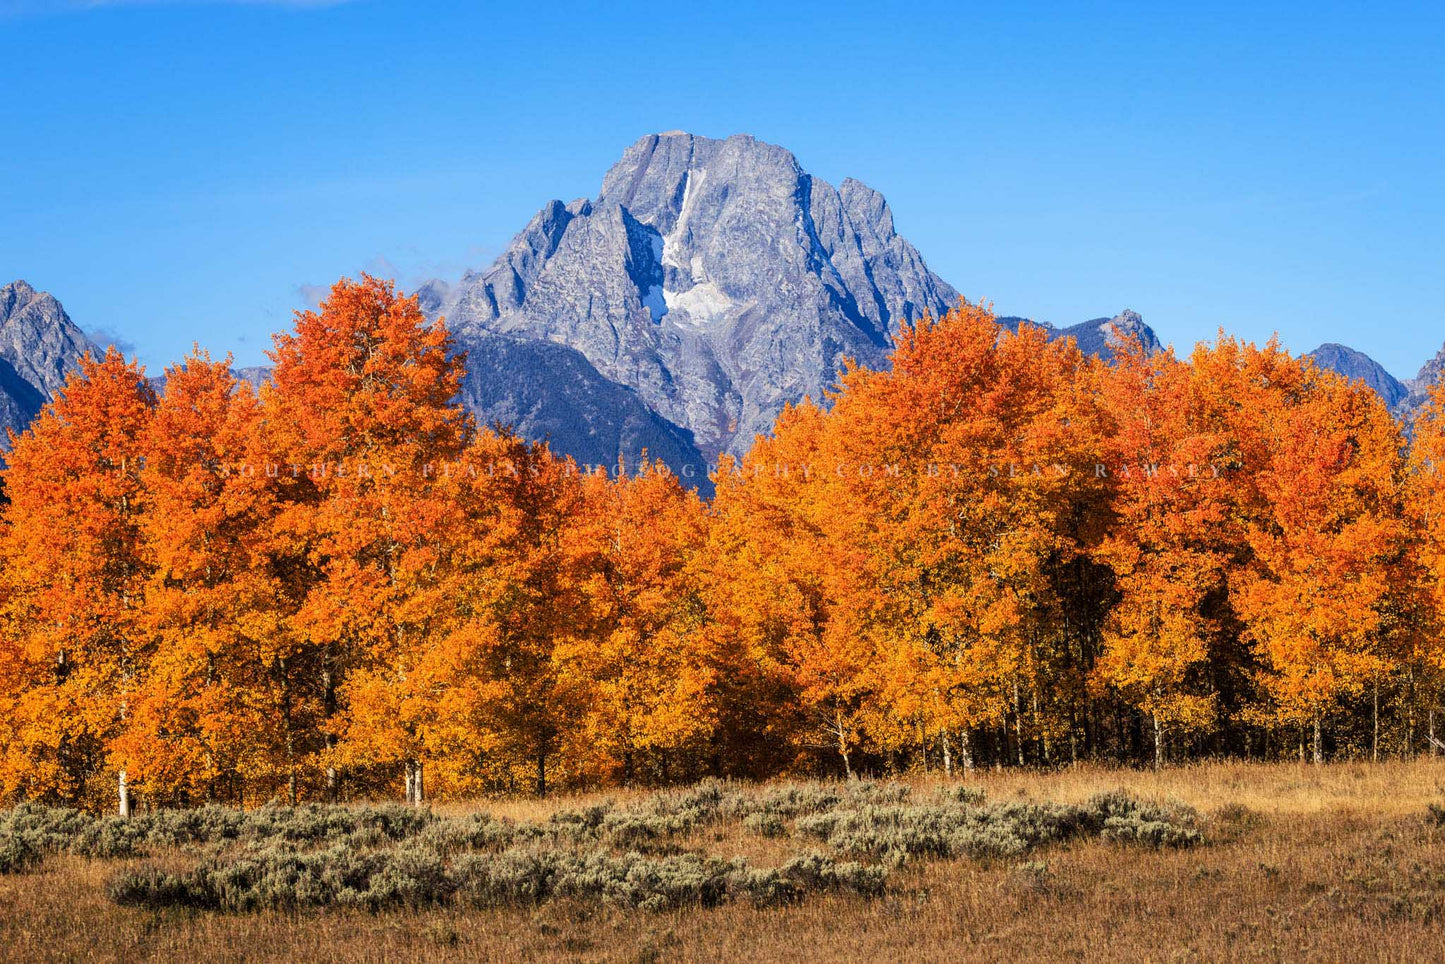 Rocky Mountain photography print of Mount Moran overlooking trees with fall foliage on an autumn day in Grand Teton National Park, Wyoming by Sean Ramsey of Southern Plains Photography.